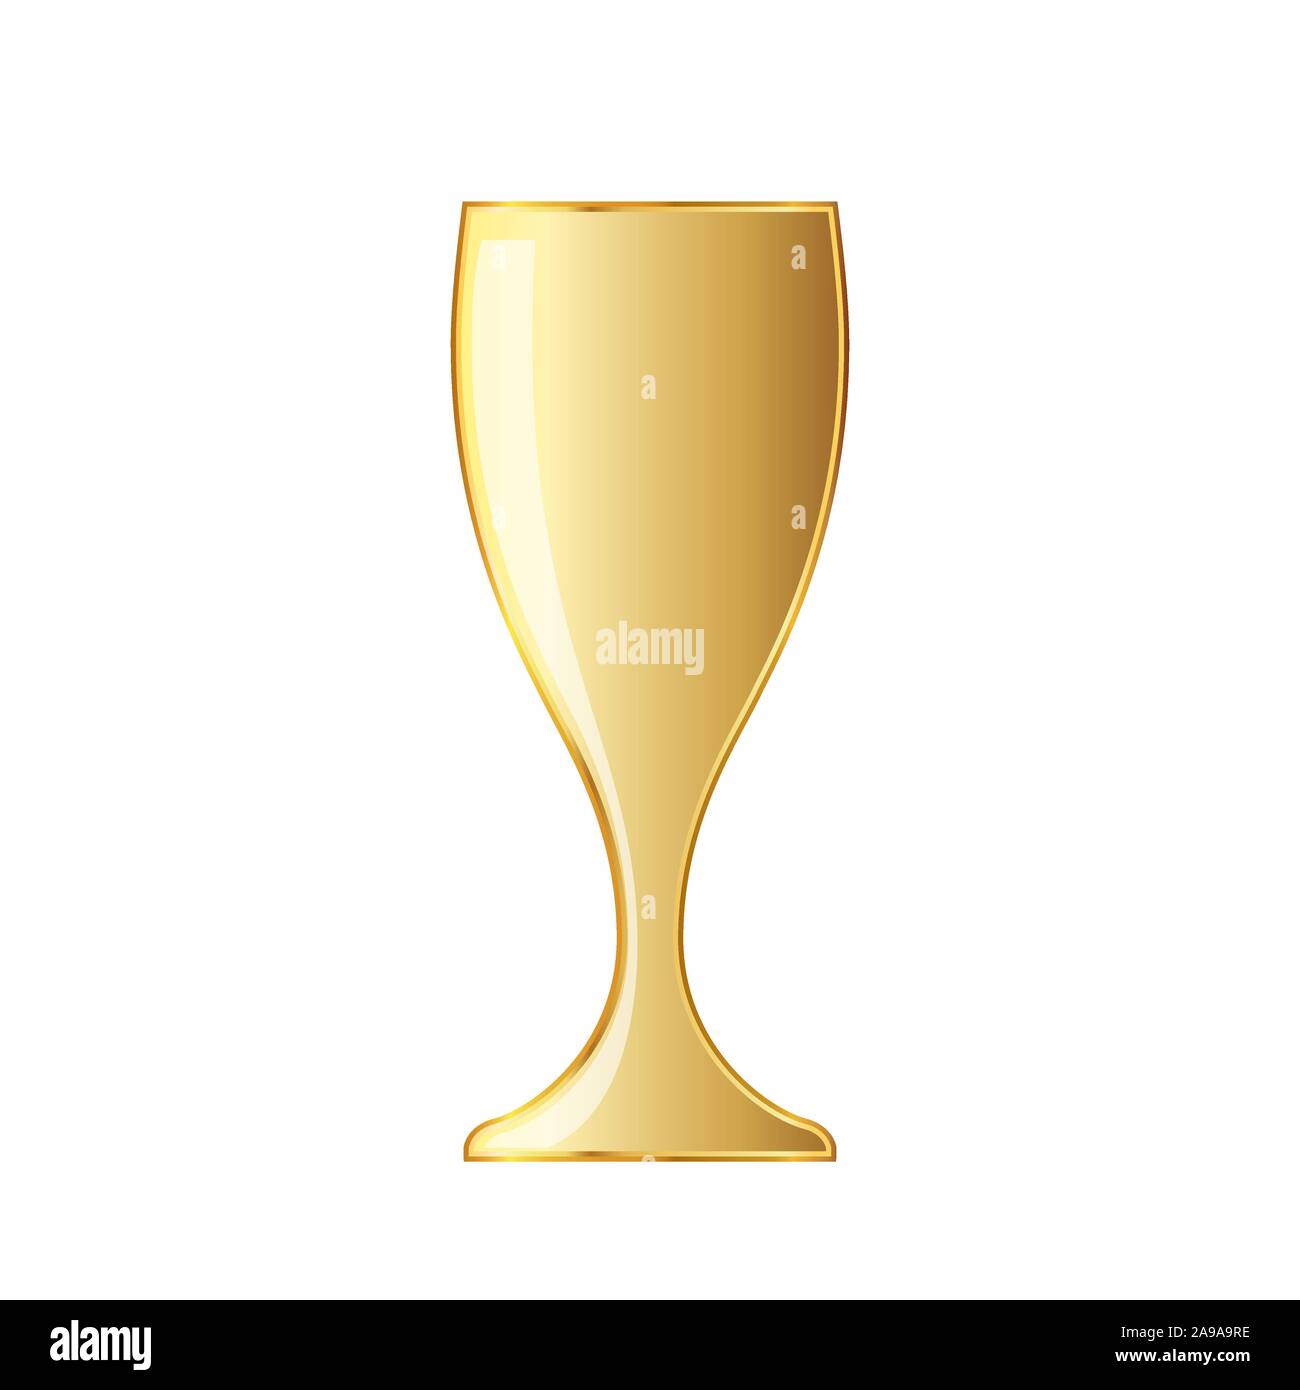 Golden wine glass icon. Vector illustration. Golden wine glass cup icon on white background. Stock Vector